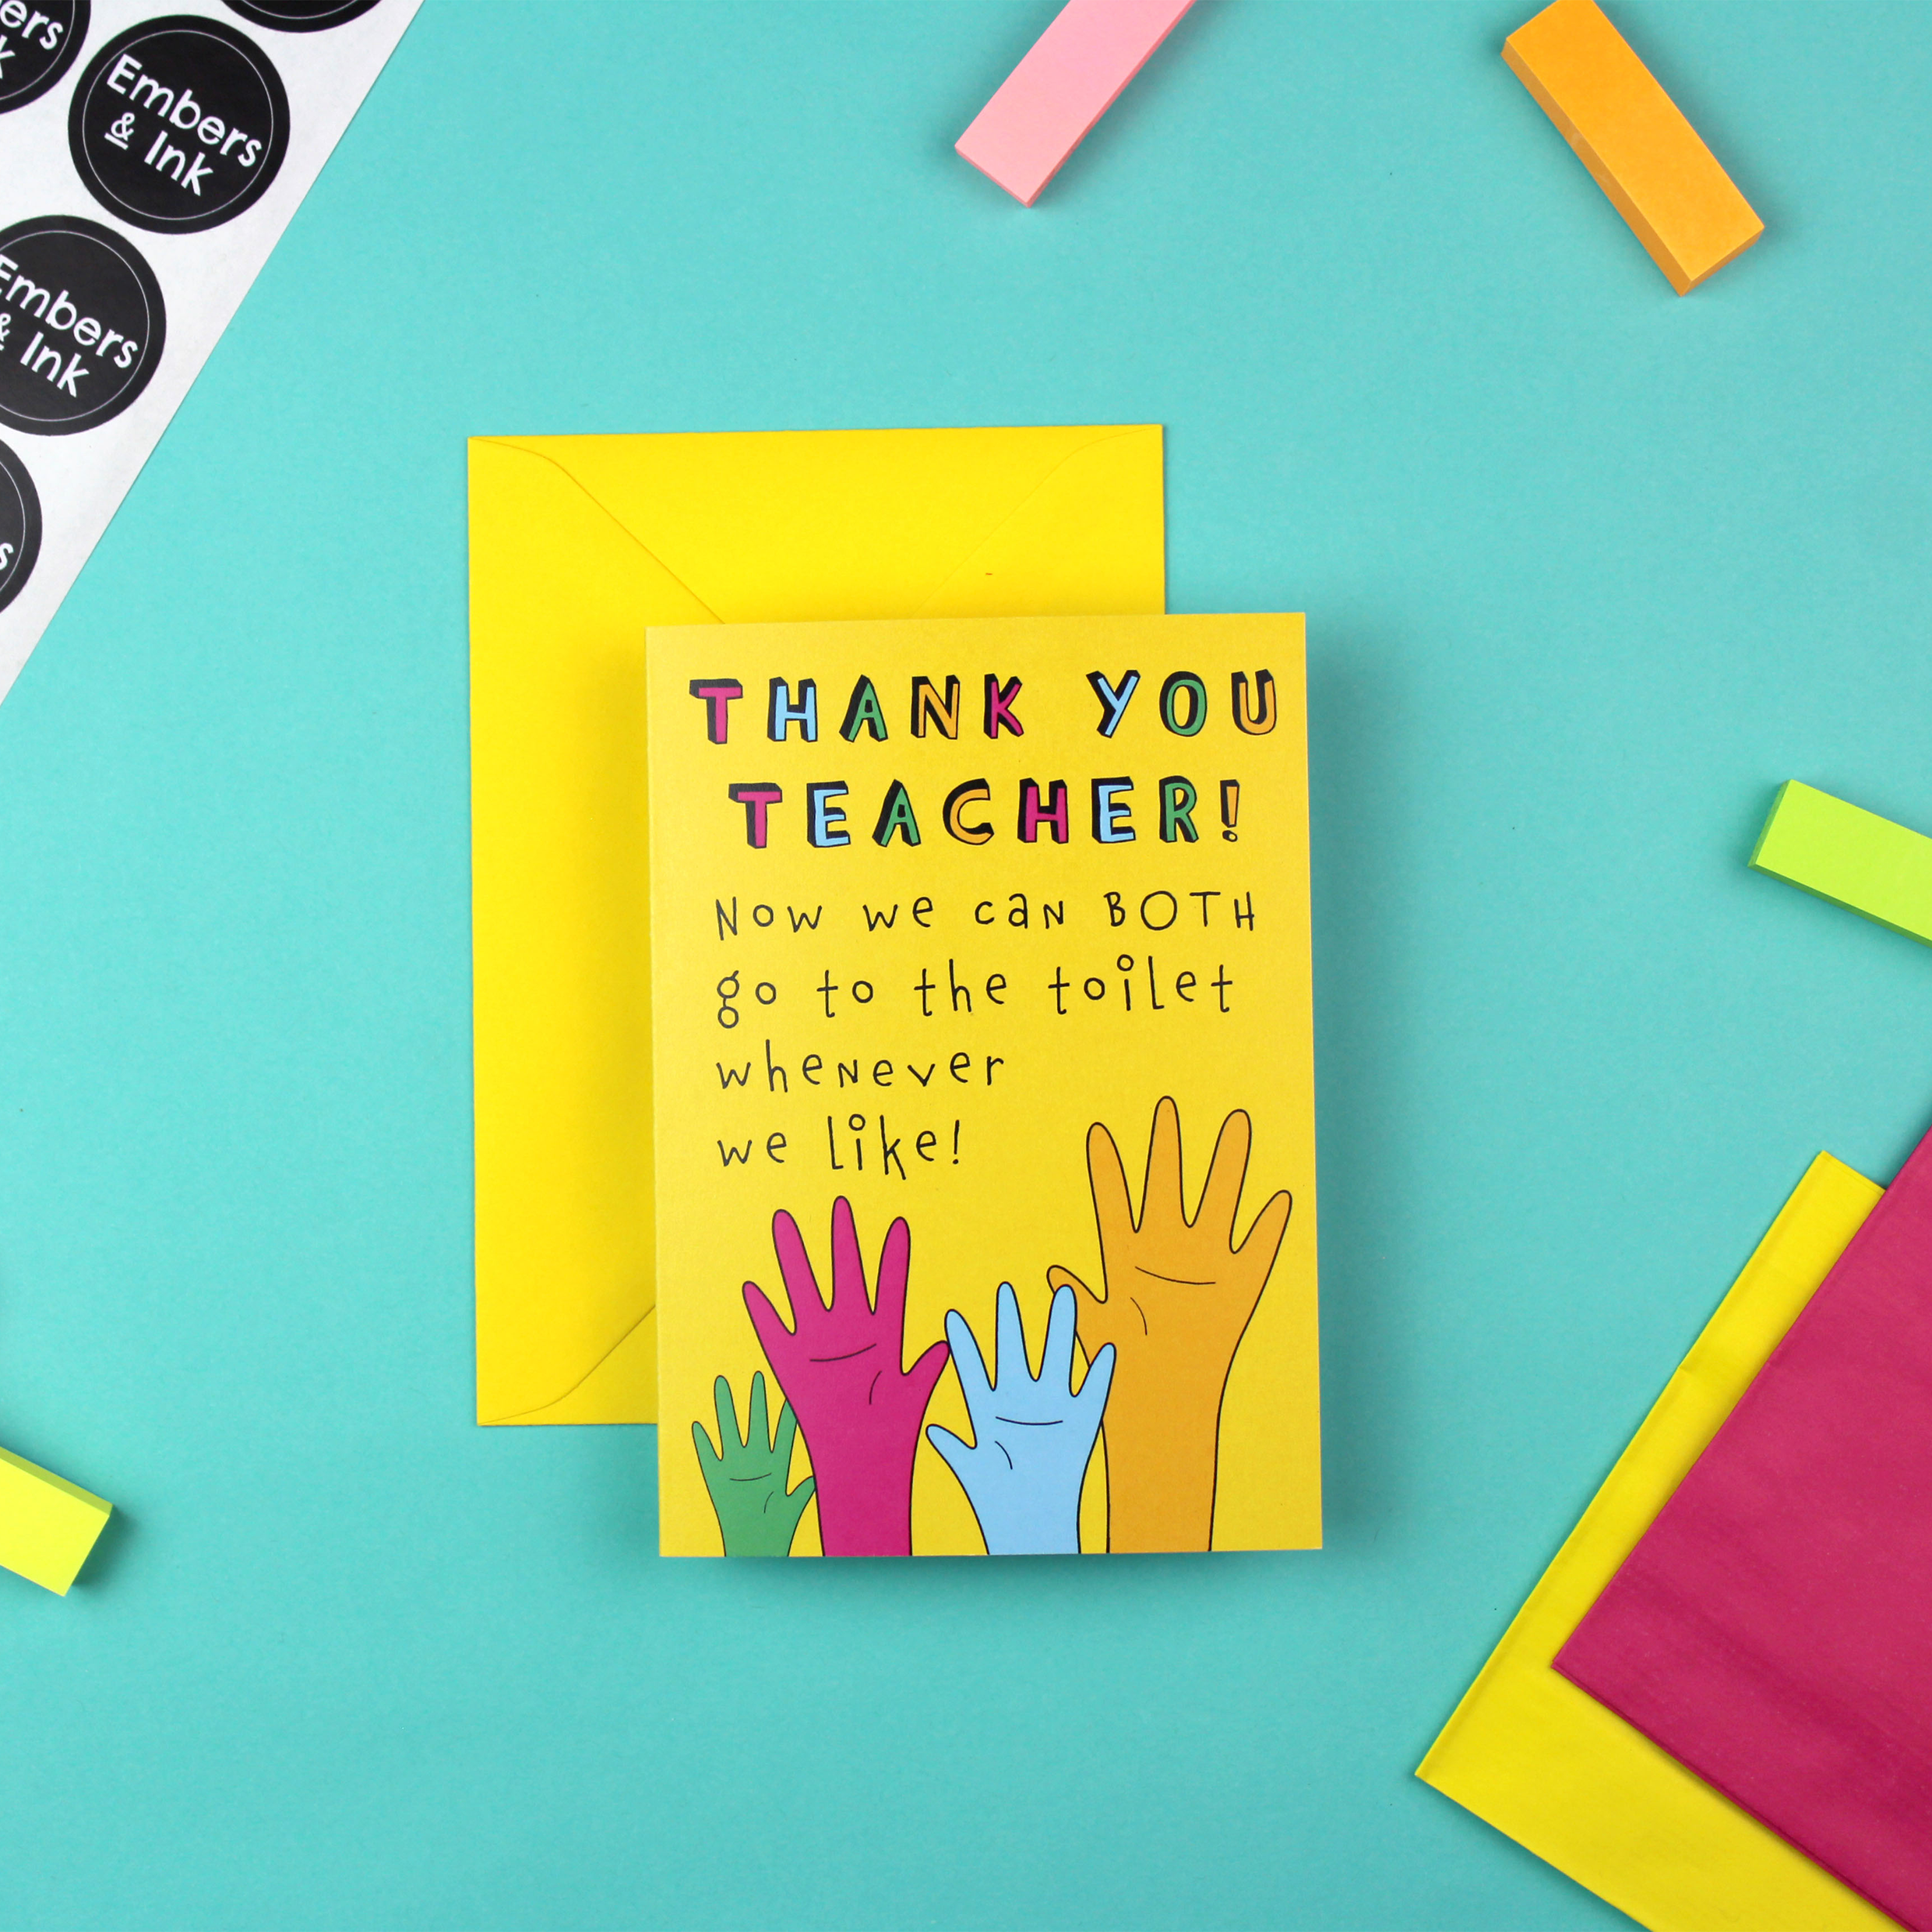 The thank you teacher card is shown with a bright yellow envelope